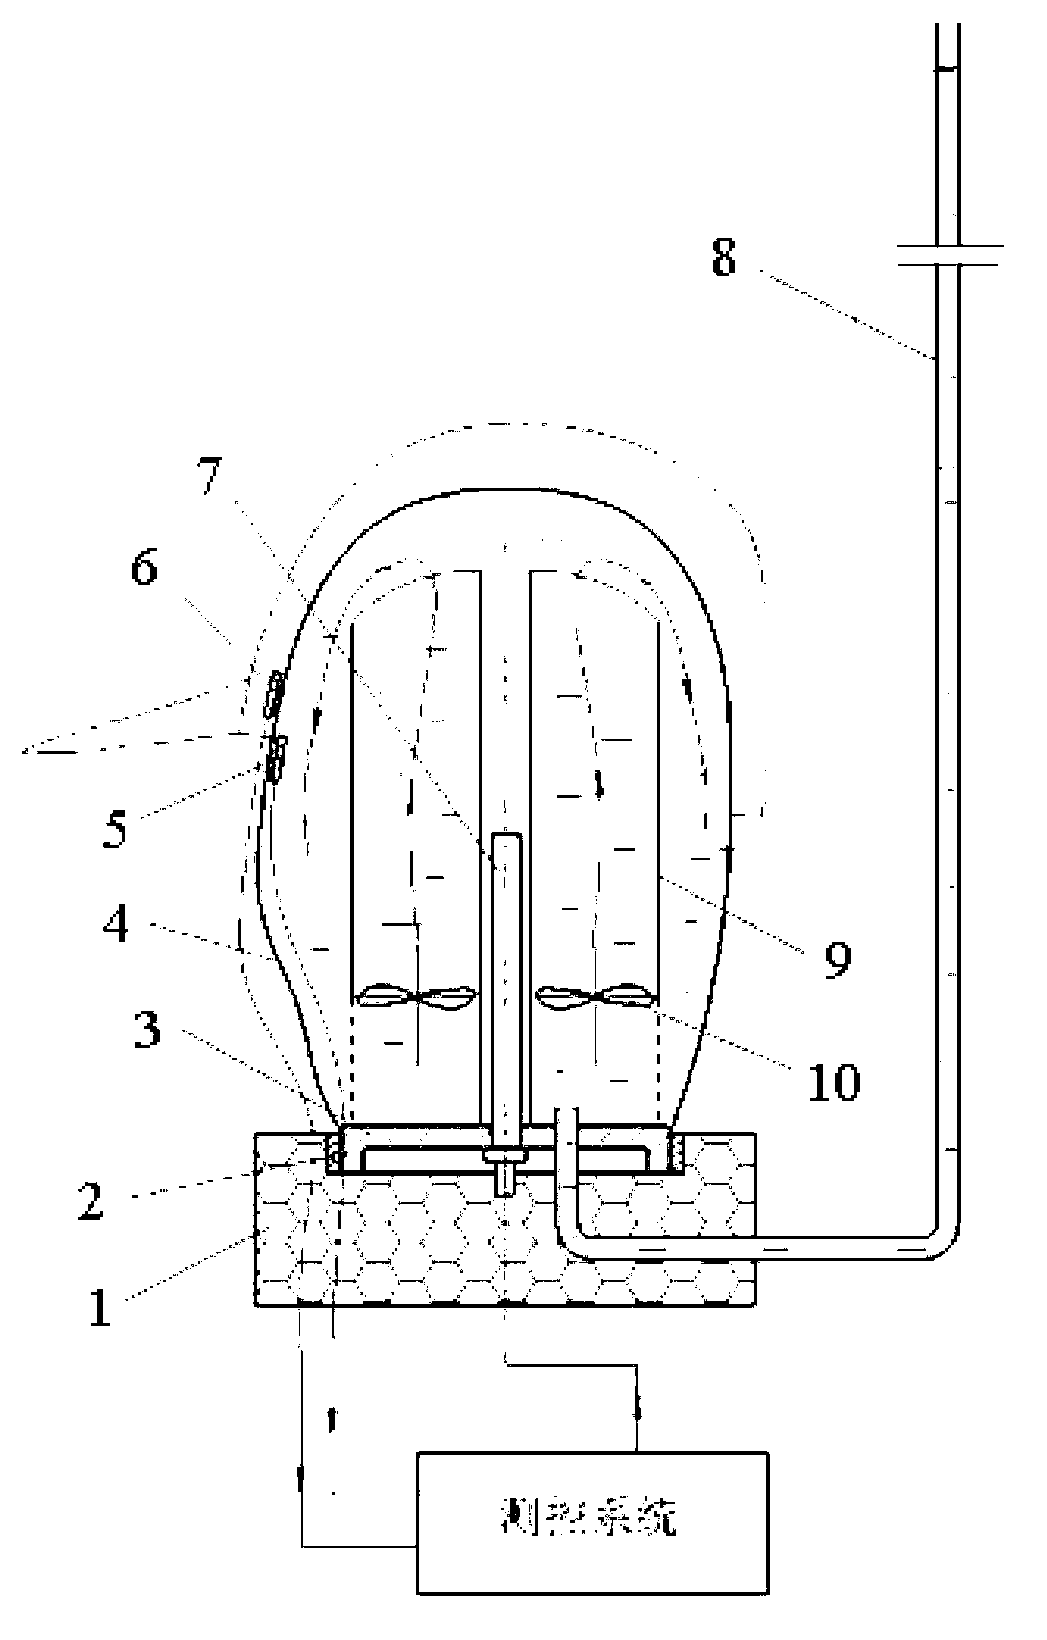 Method for measuring heat resistance and moisture resistance of hat